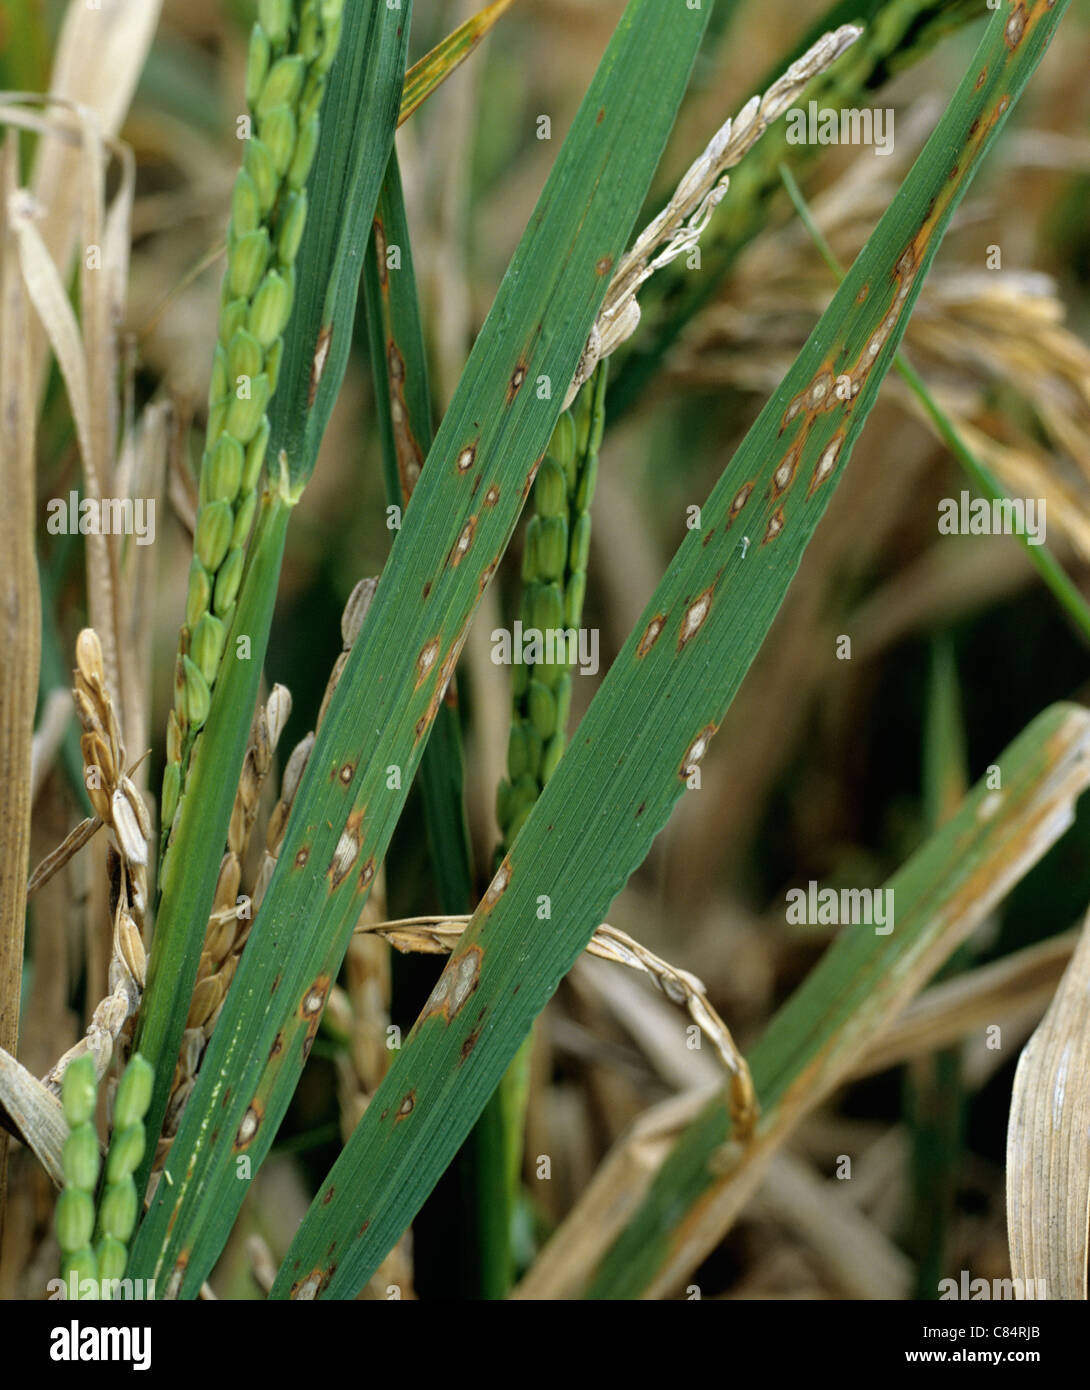 Rice blast (Pyricularia grisea) affecting leaves and ears of rice crop Stock Photo